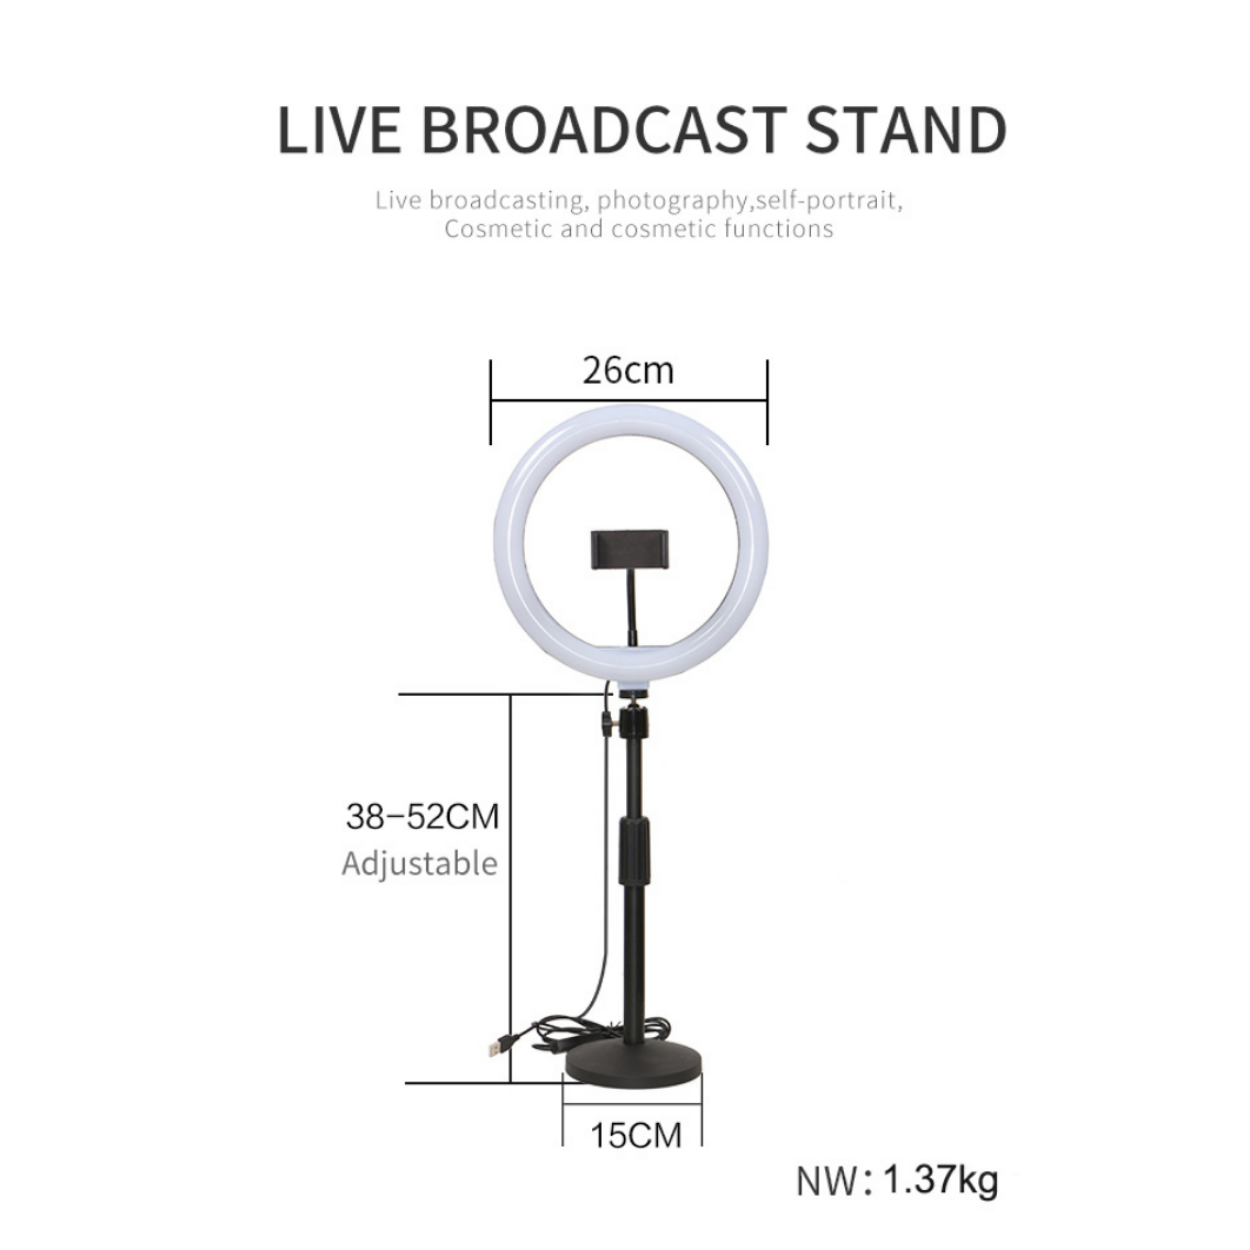 NEOWOOD BY-L205 LIVE STREAMING STAND (BEAUTY LAMP), NEOWOOD, STAND, neowood-stand-neo-by-l205, ZOSO MUSIC SDN BHD